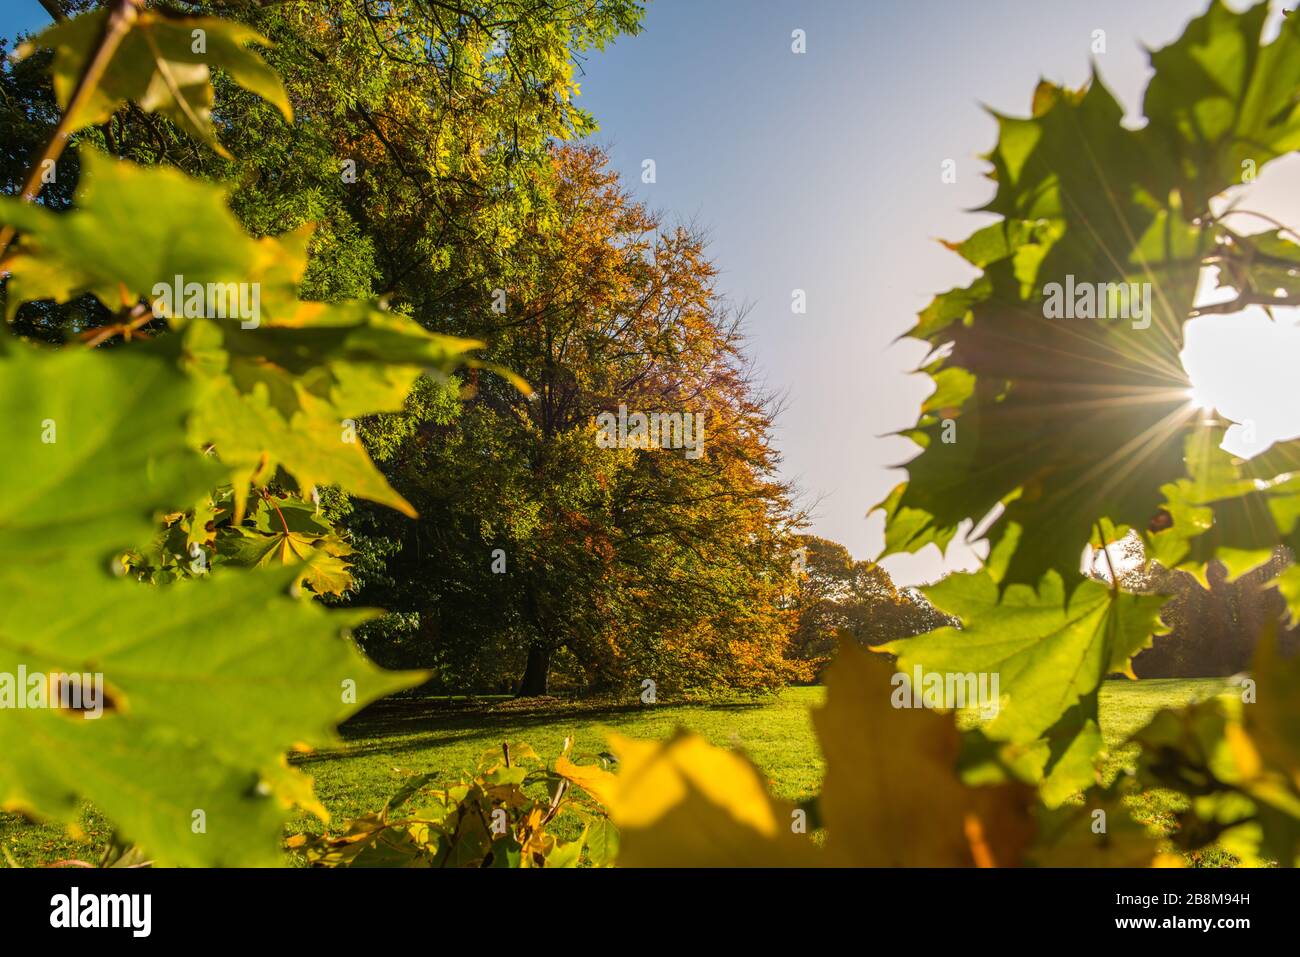 Fall foliage in Park Forstbaumschule, Kiel, capital city of Schleswig-Holstein, North Germany, Central Europe Stock Photo